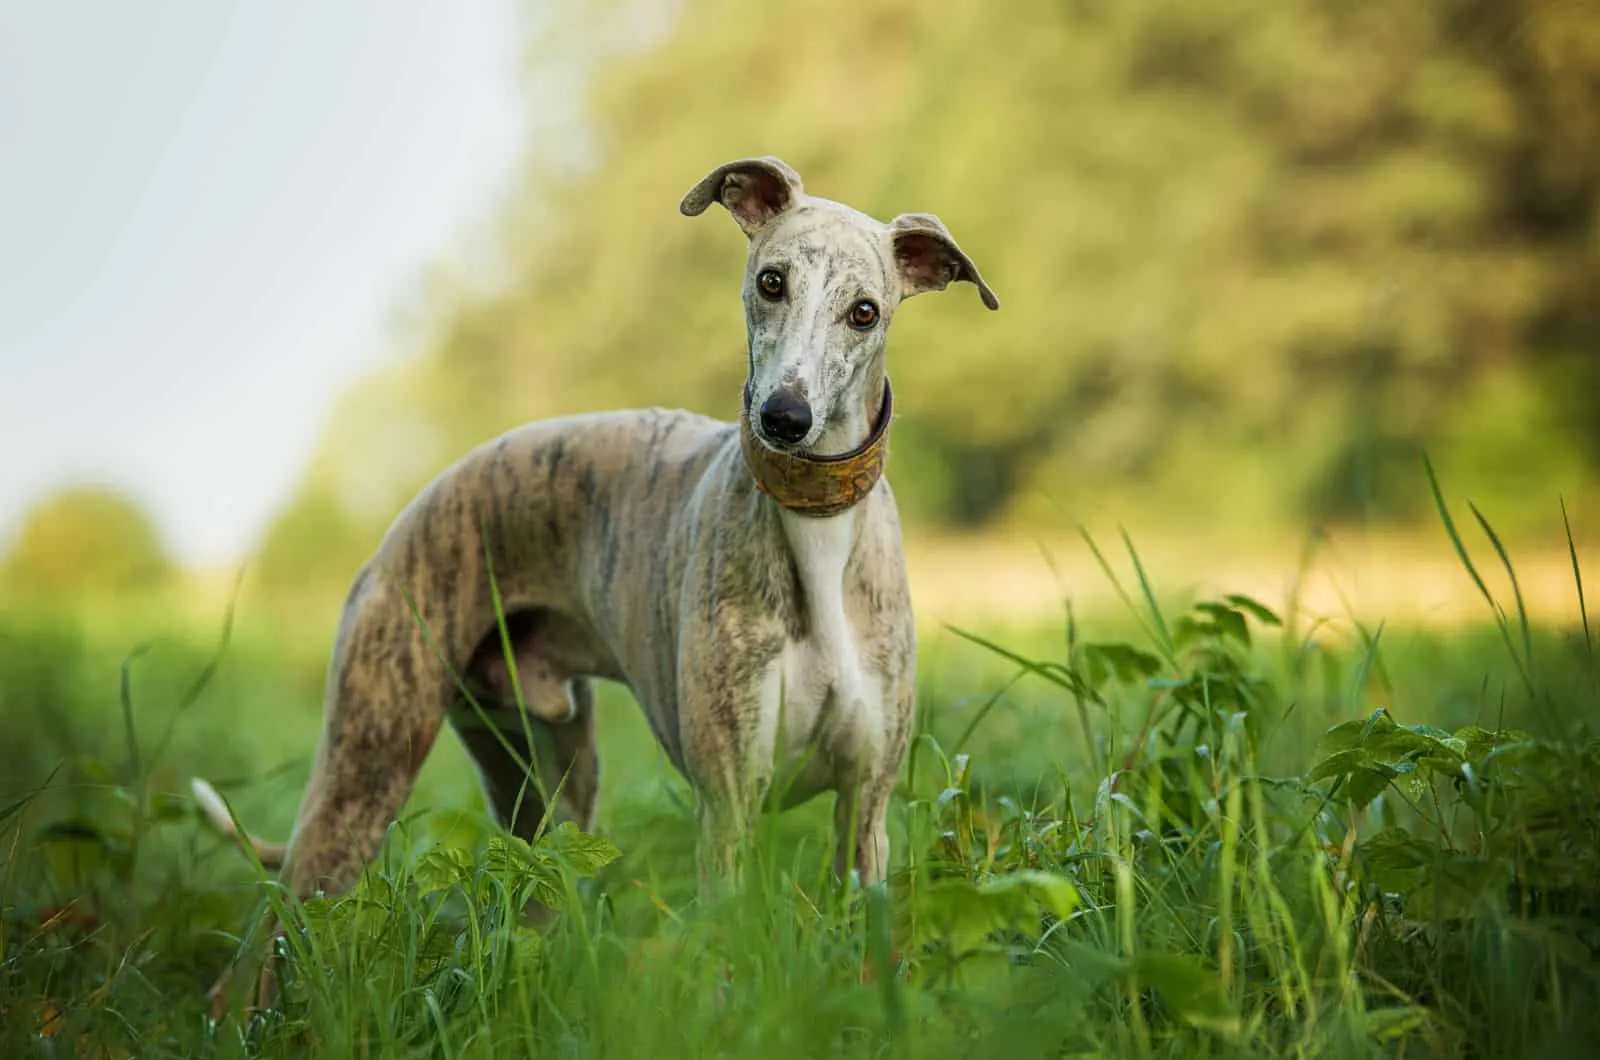 Whippet dog in the grass